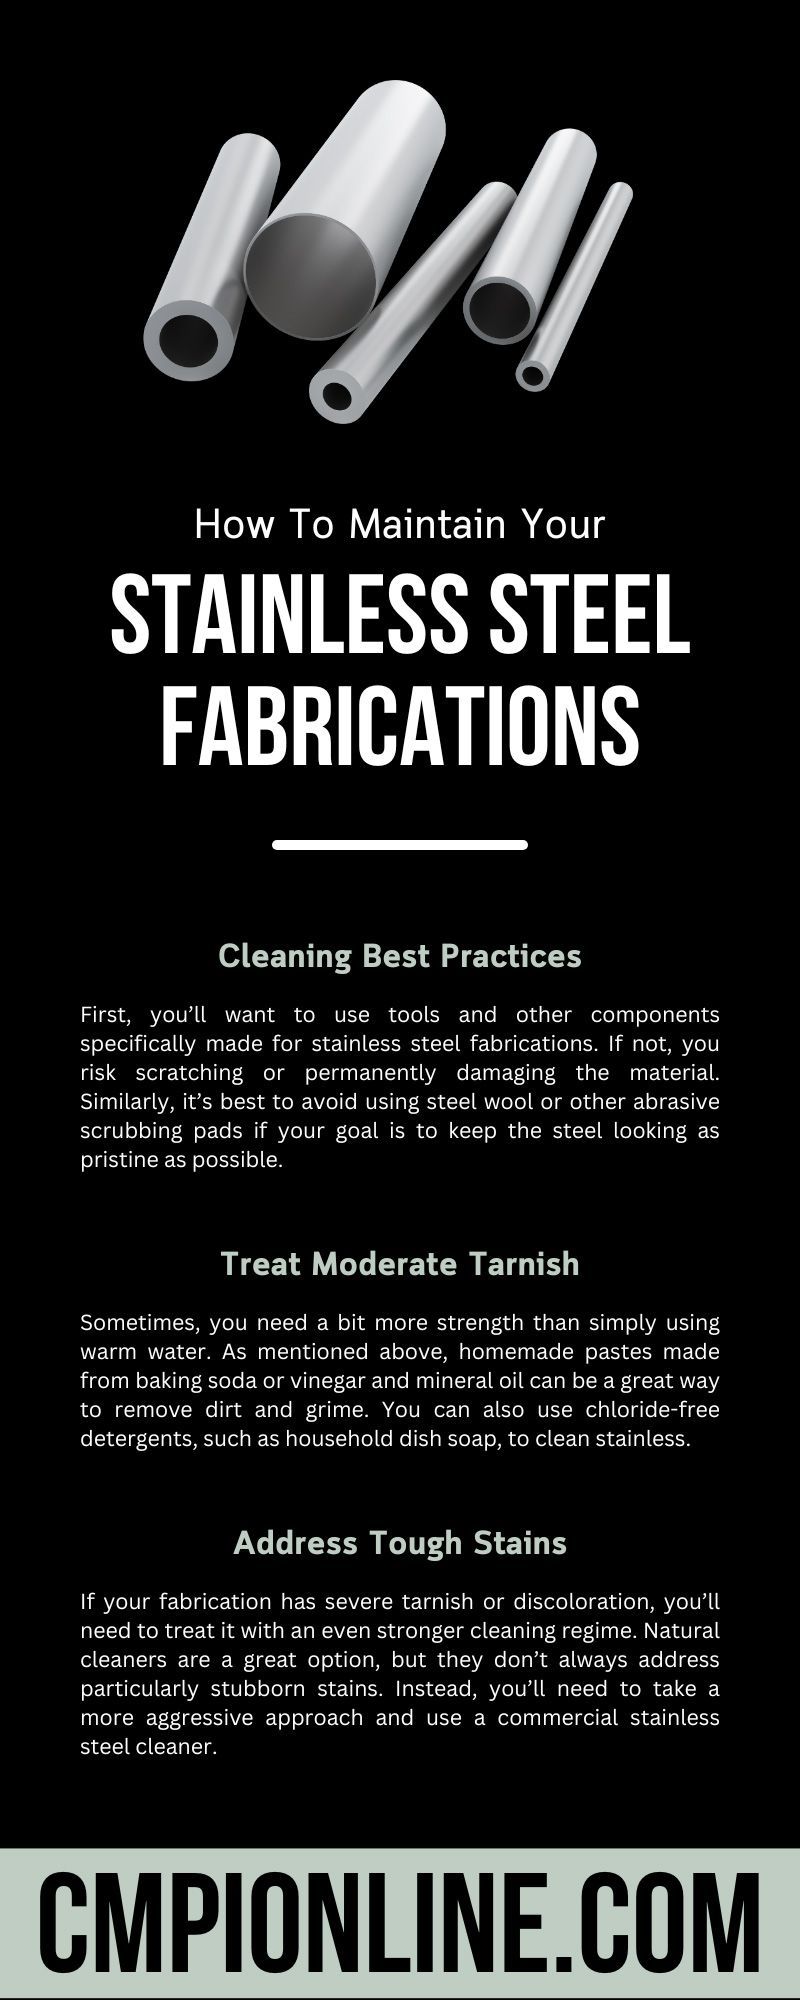 How To Maintain Your Stainless Steel Fabrications